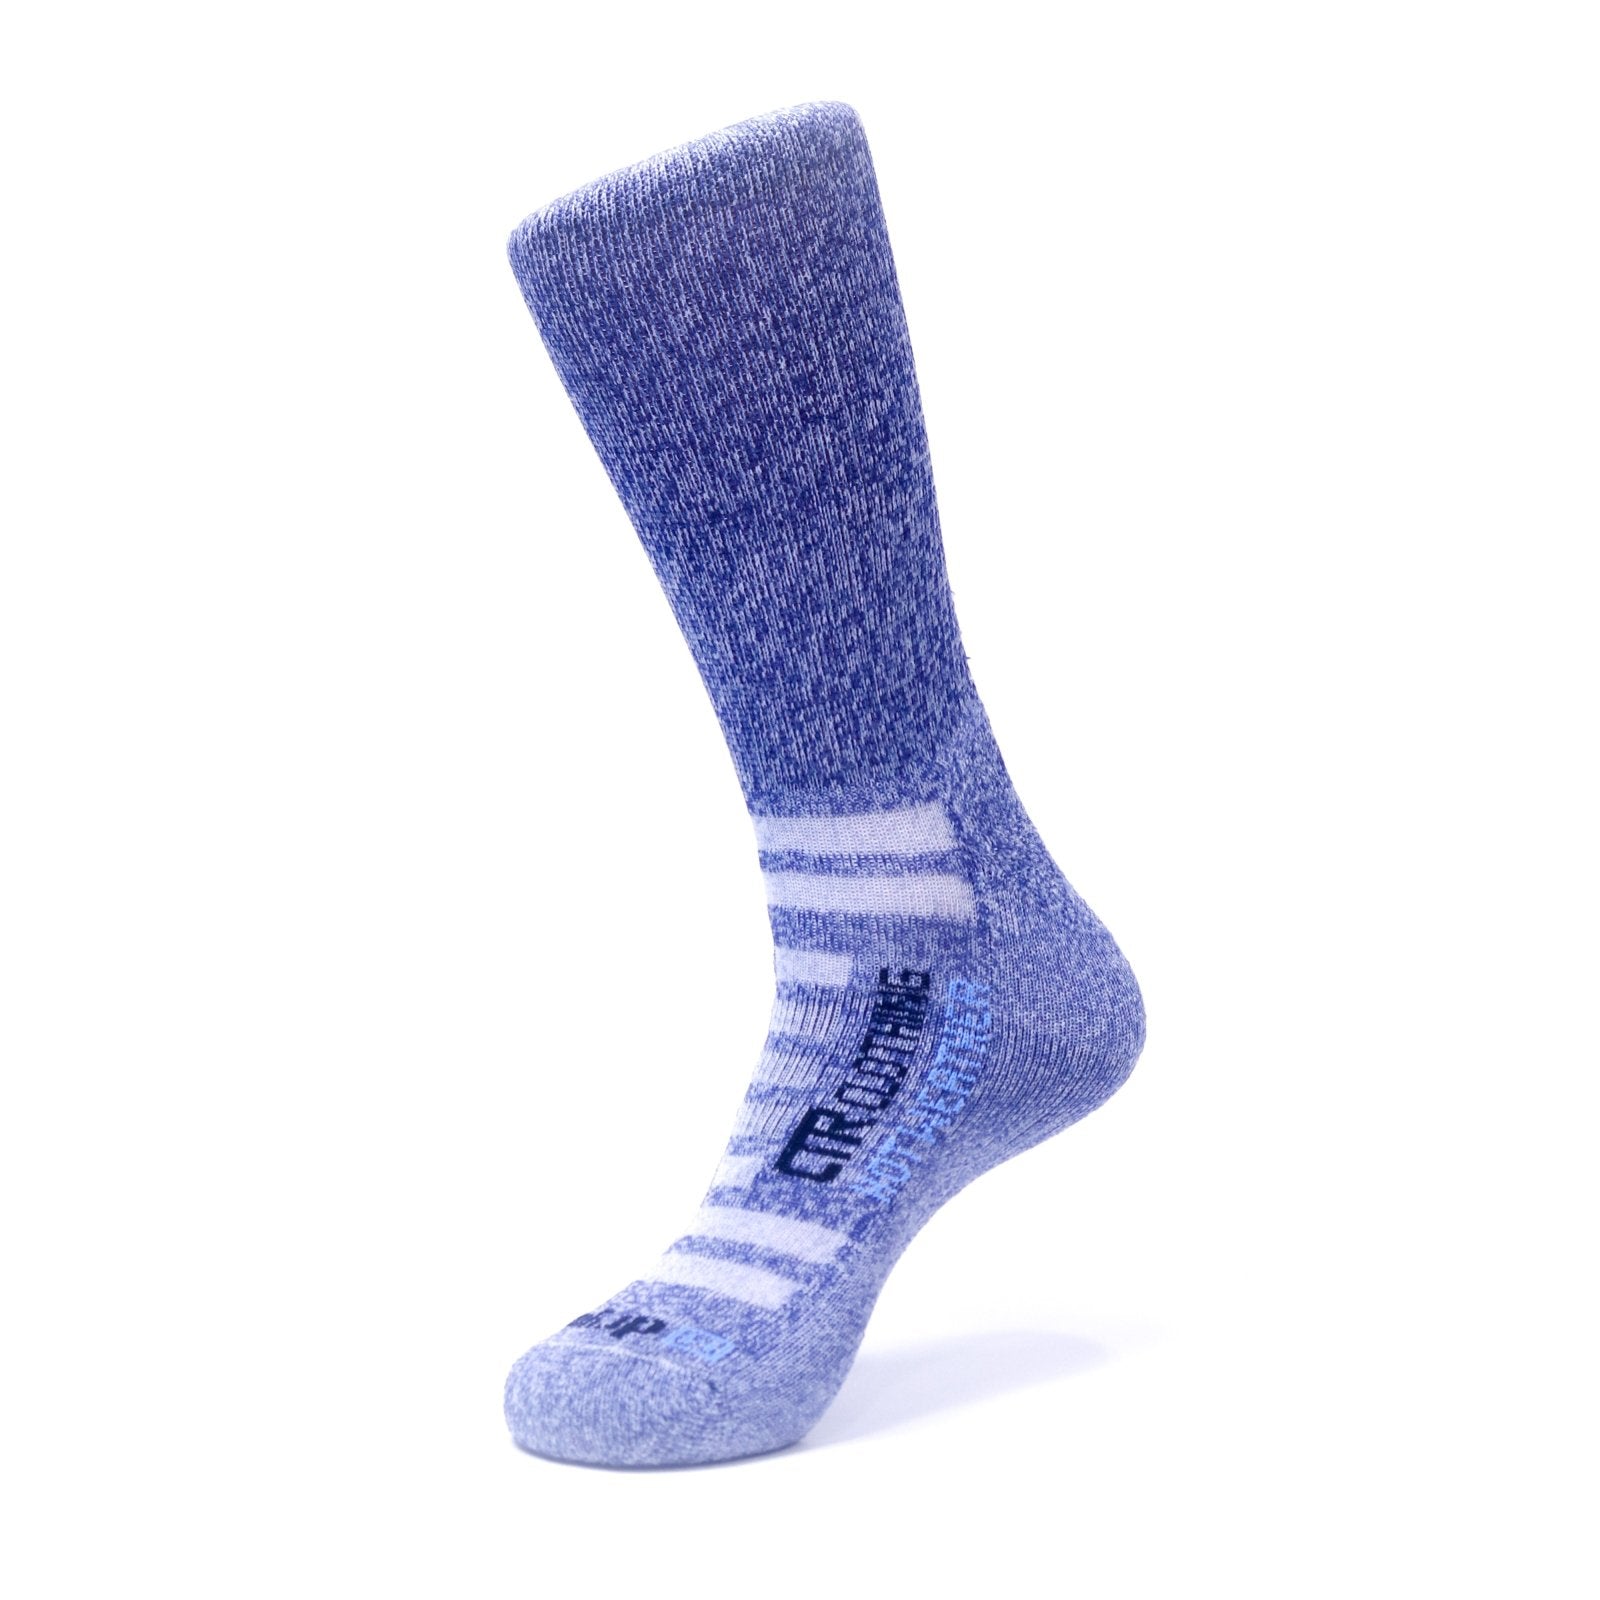 Drymax Hot Weather "CTR Sock" Lite-Mesh - ODIONCTR-DRS-51147-P